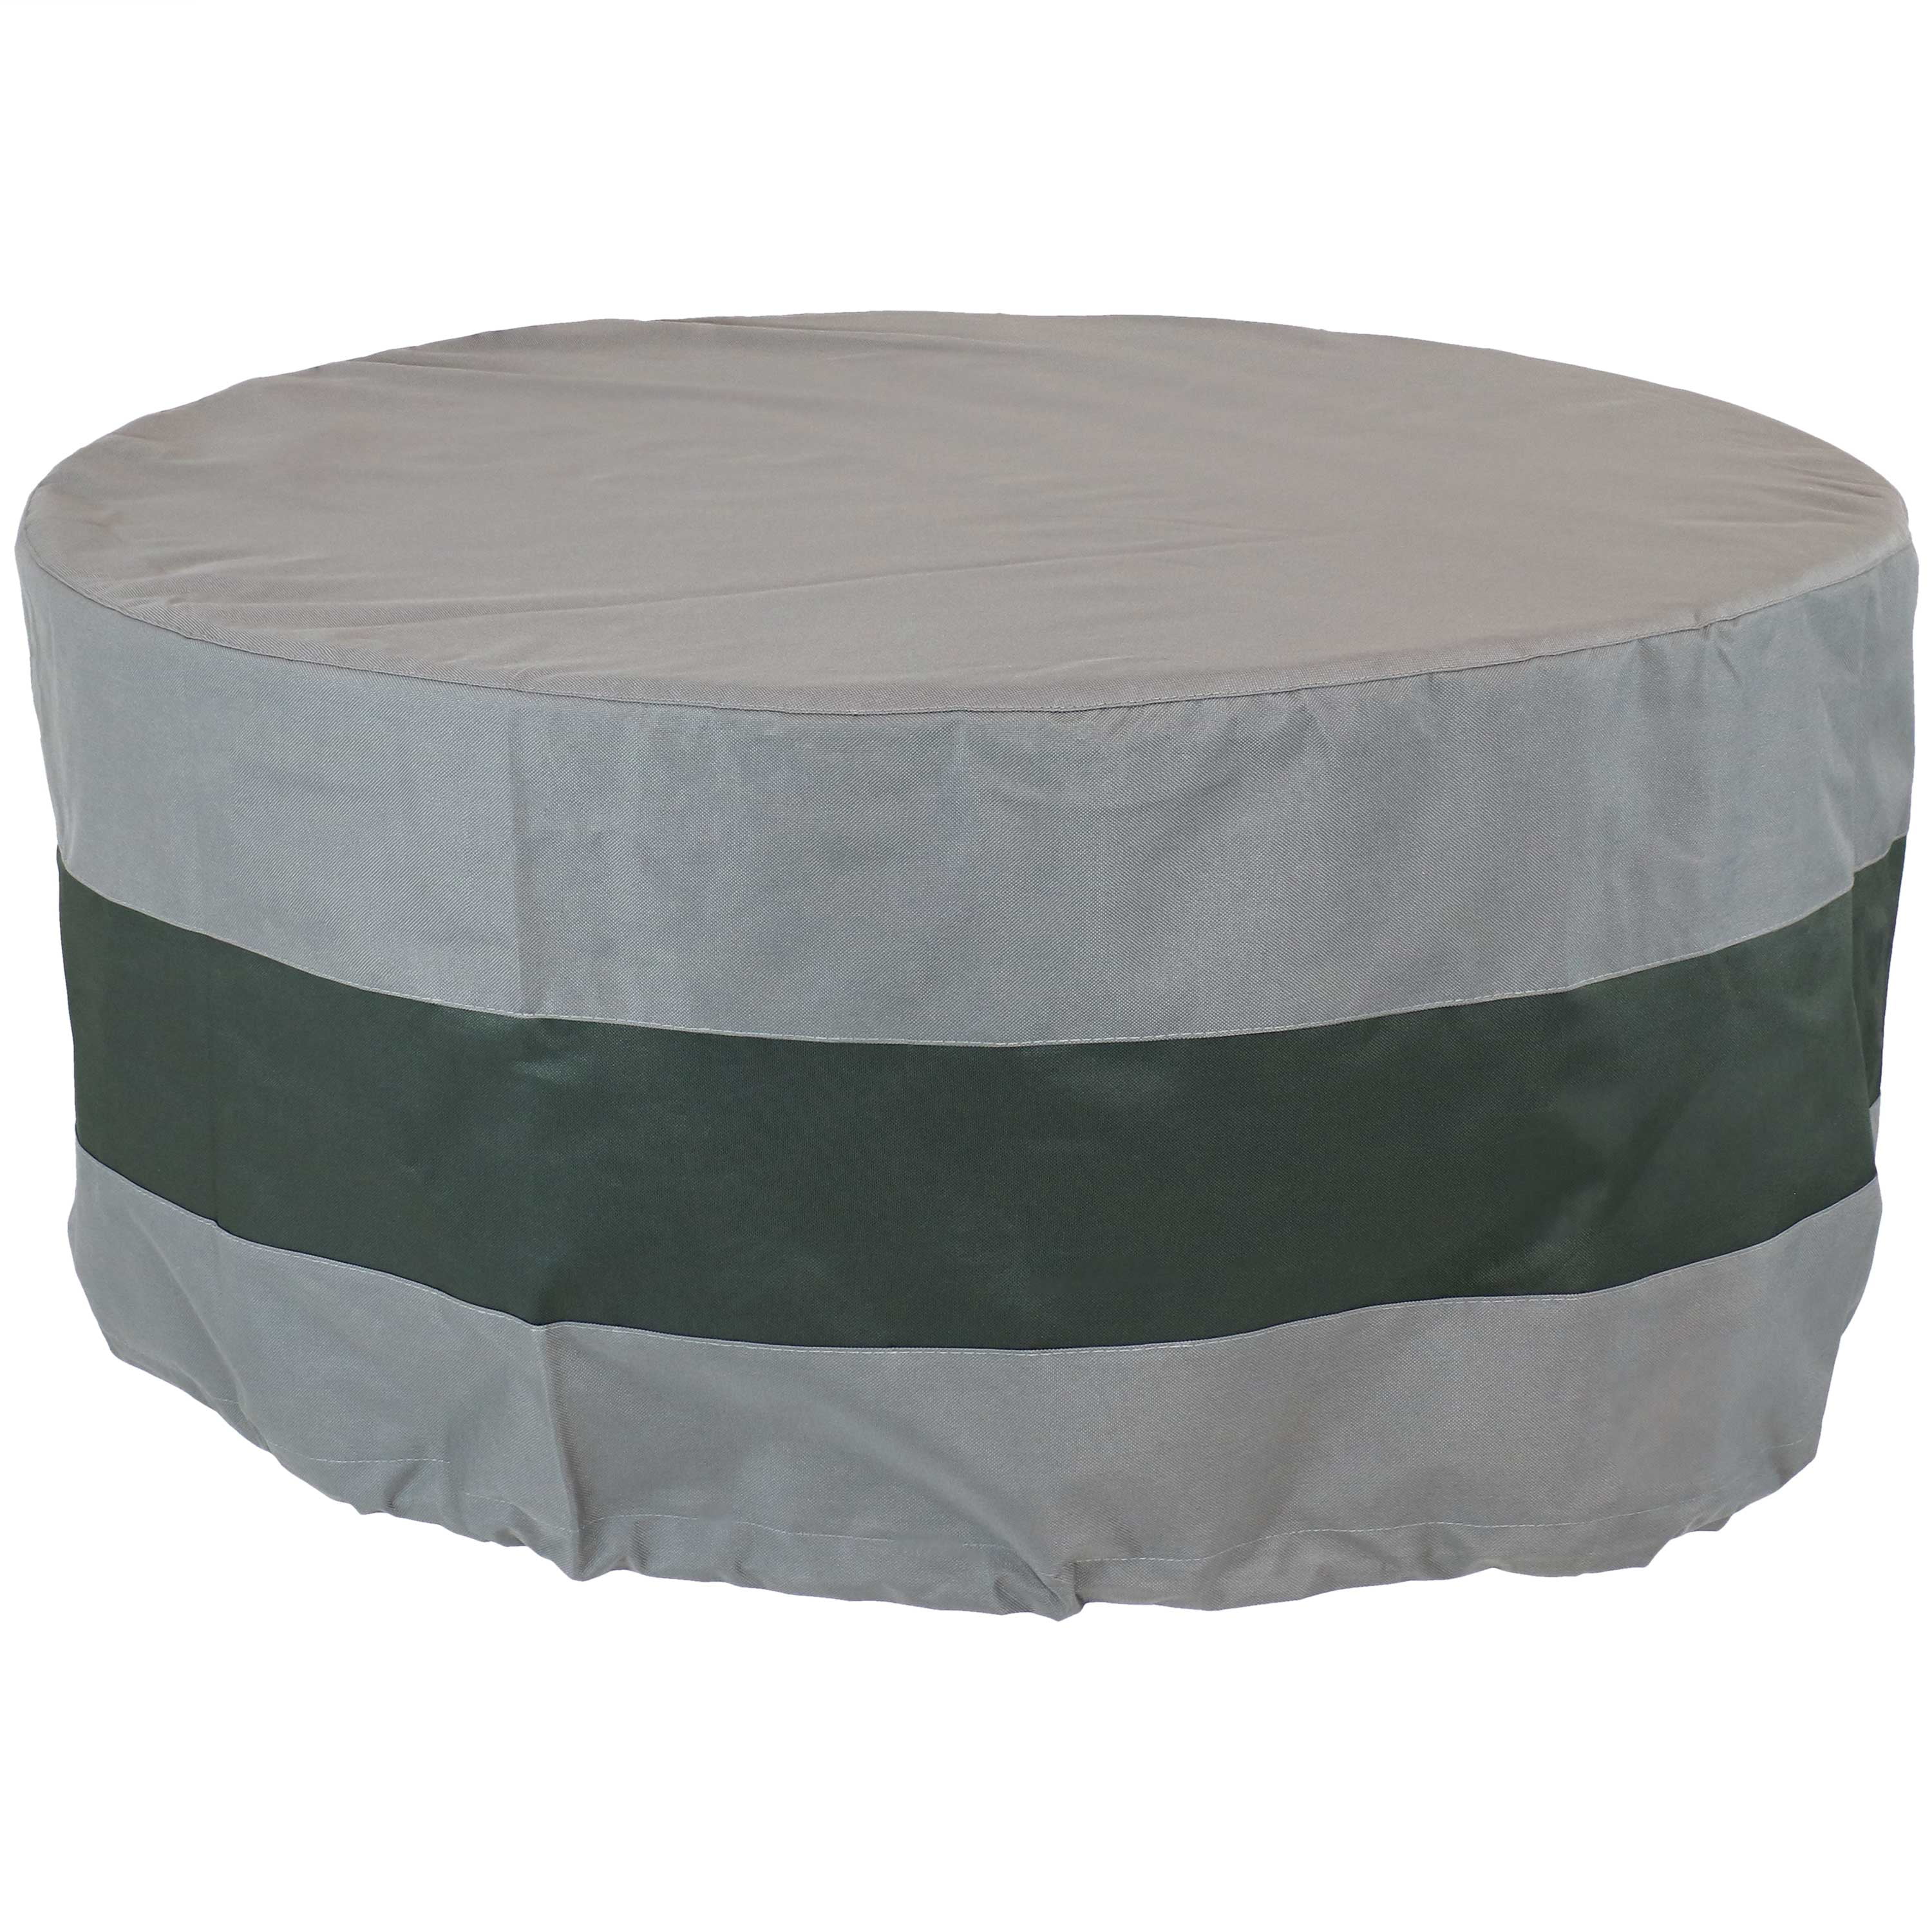 Grey Waterproof Round Fire Pit Cover Outdoor Patio Fits up to 44" Diameter 